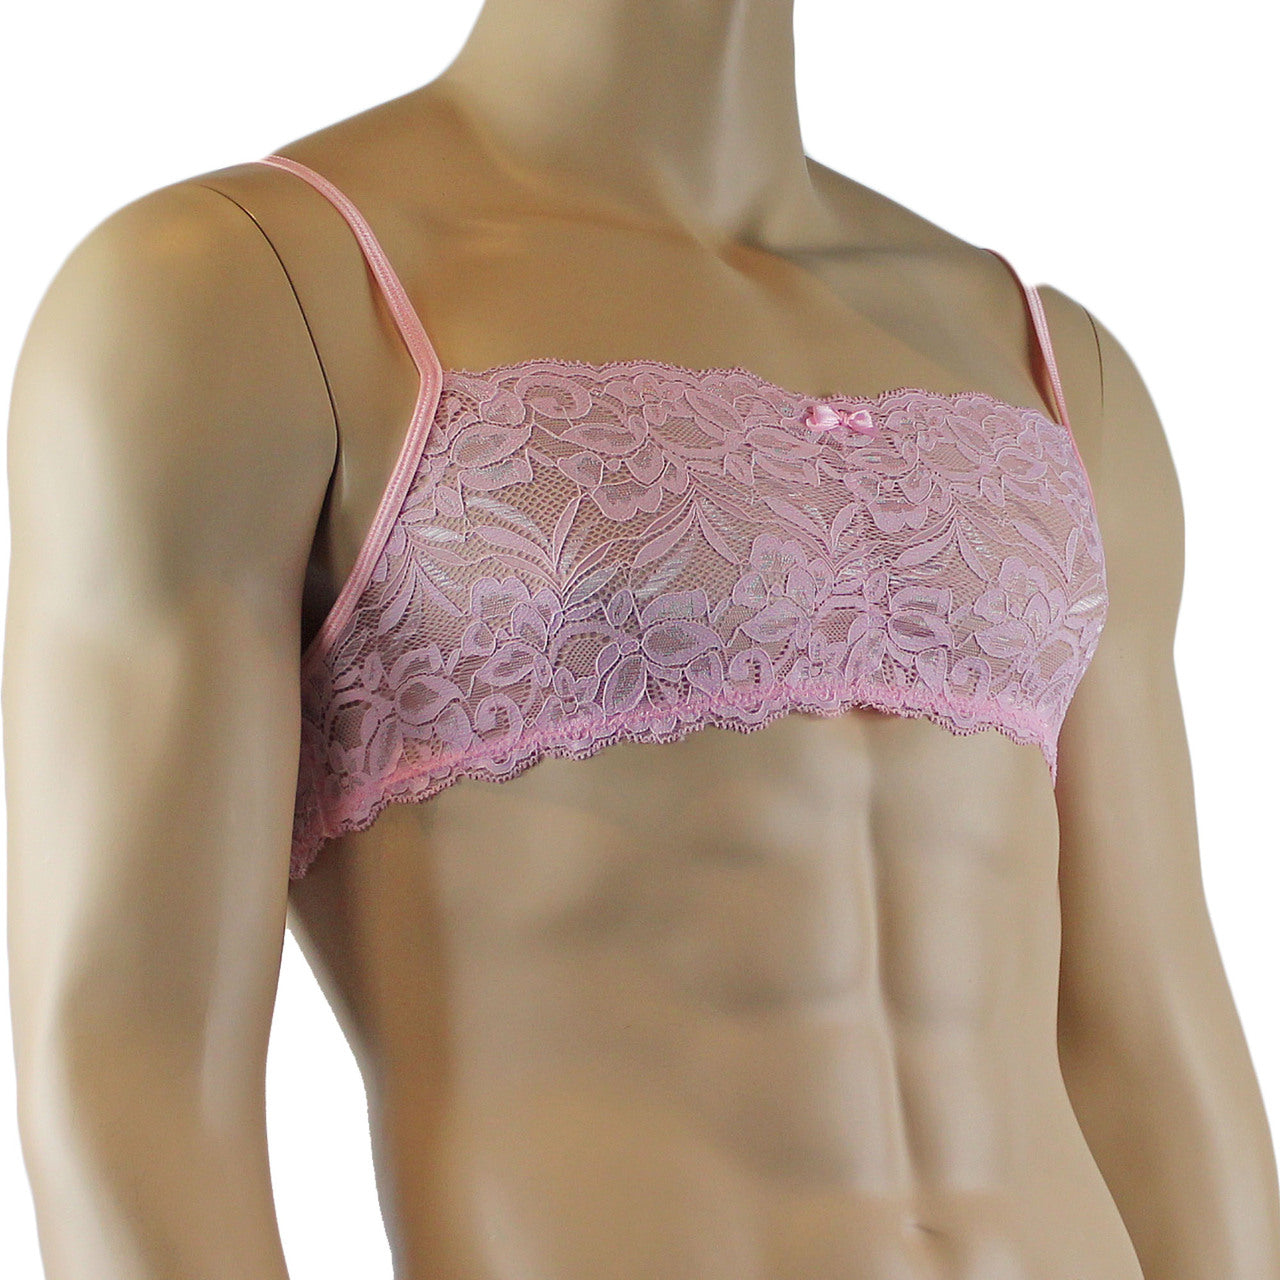 Mens Kristy Lingerie Bra Top in Lace with thin Straps Light Pink